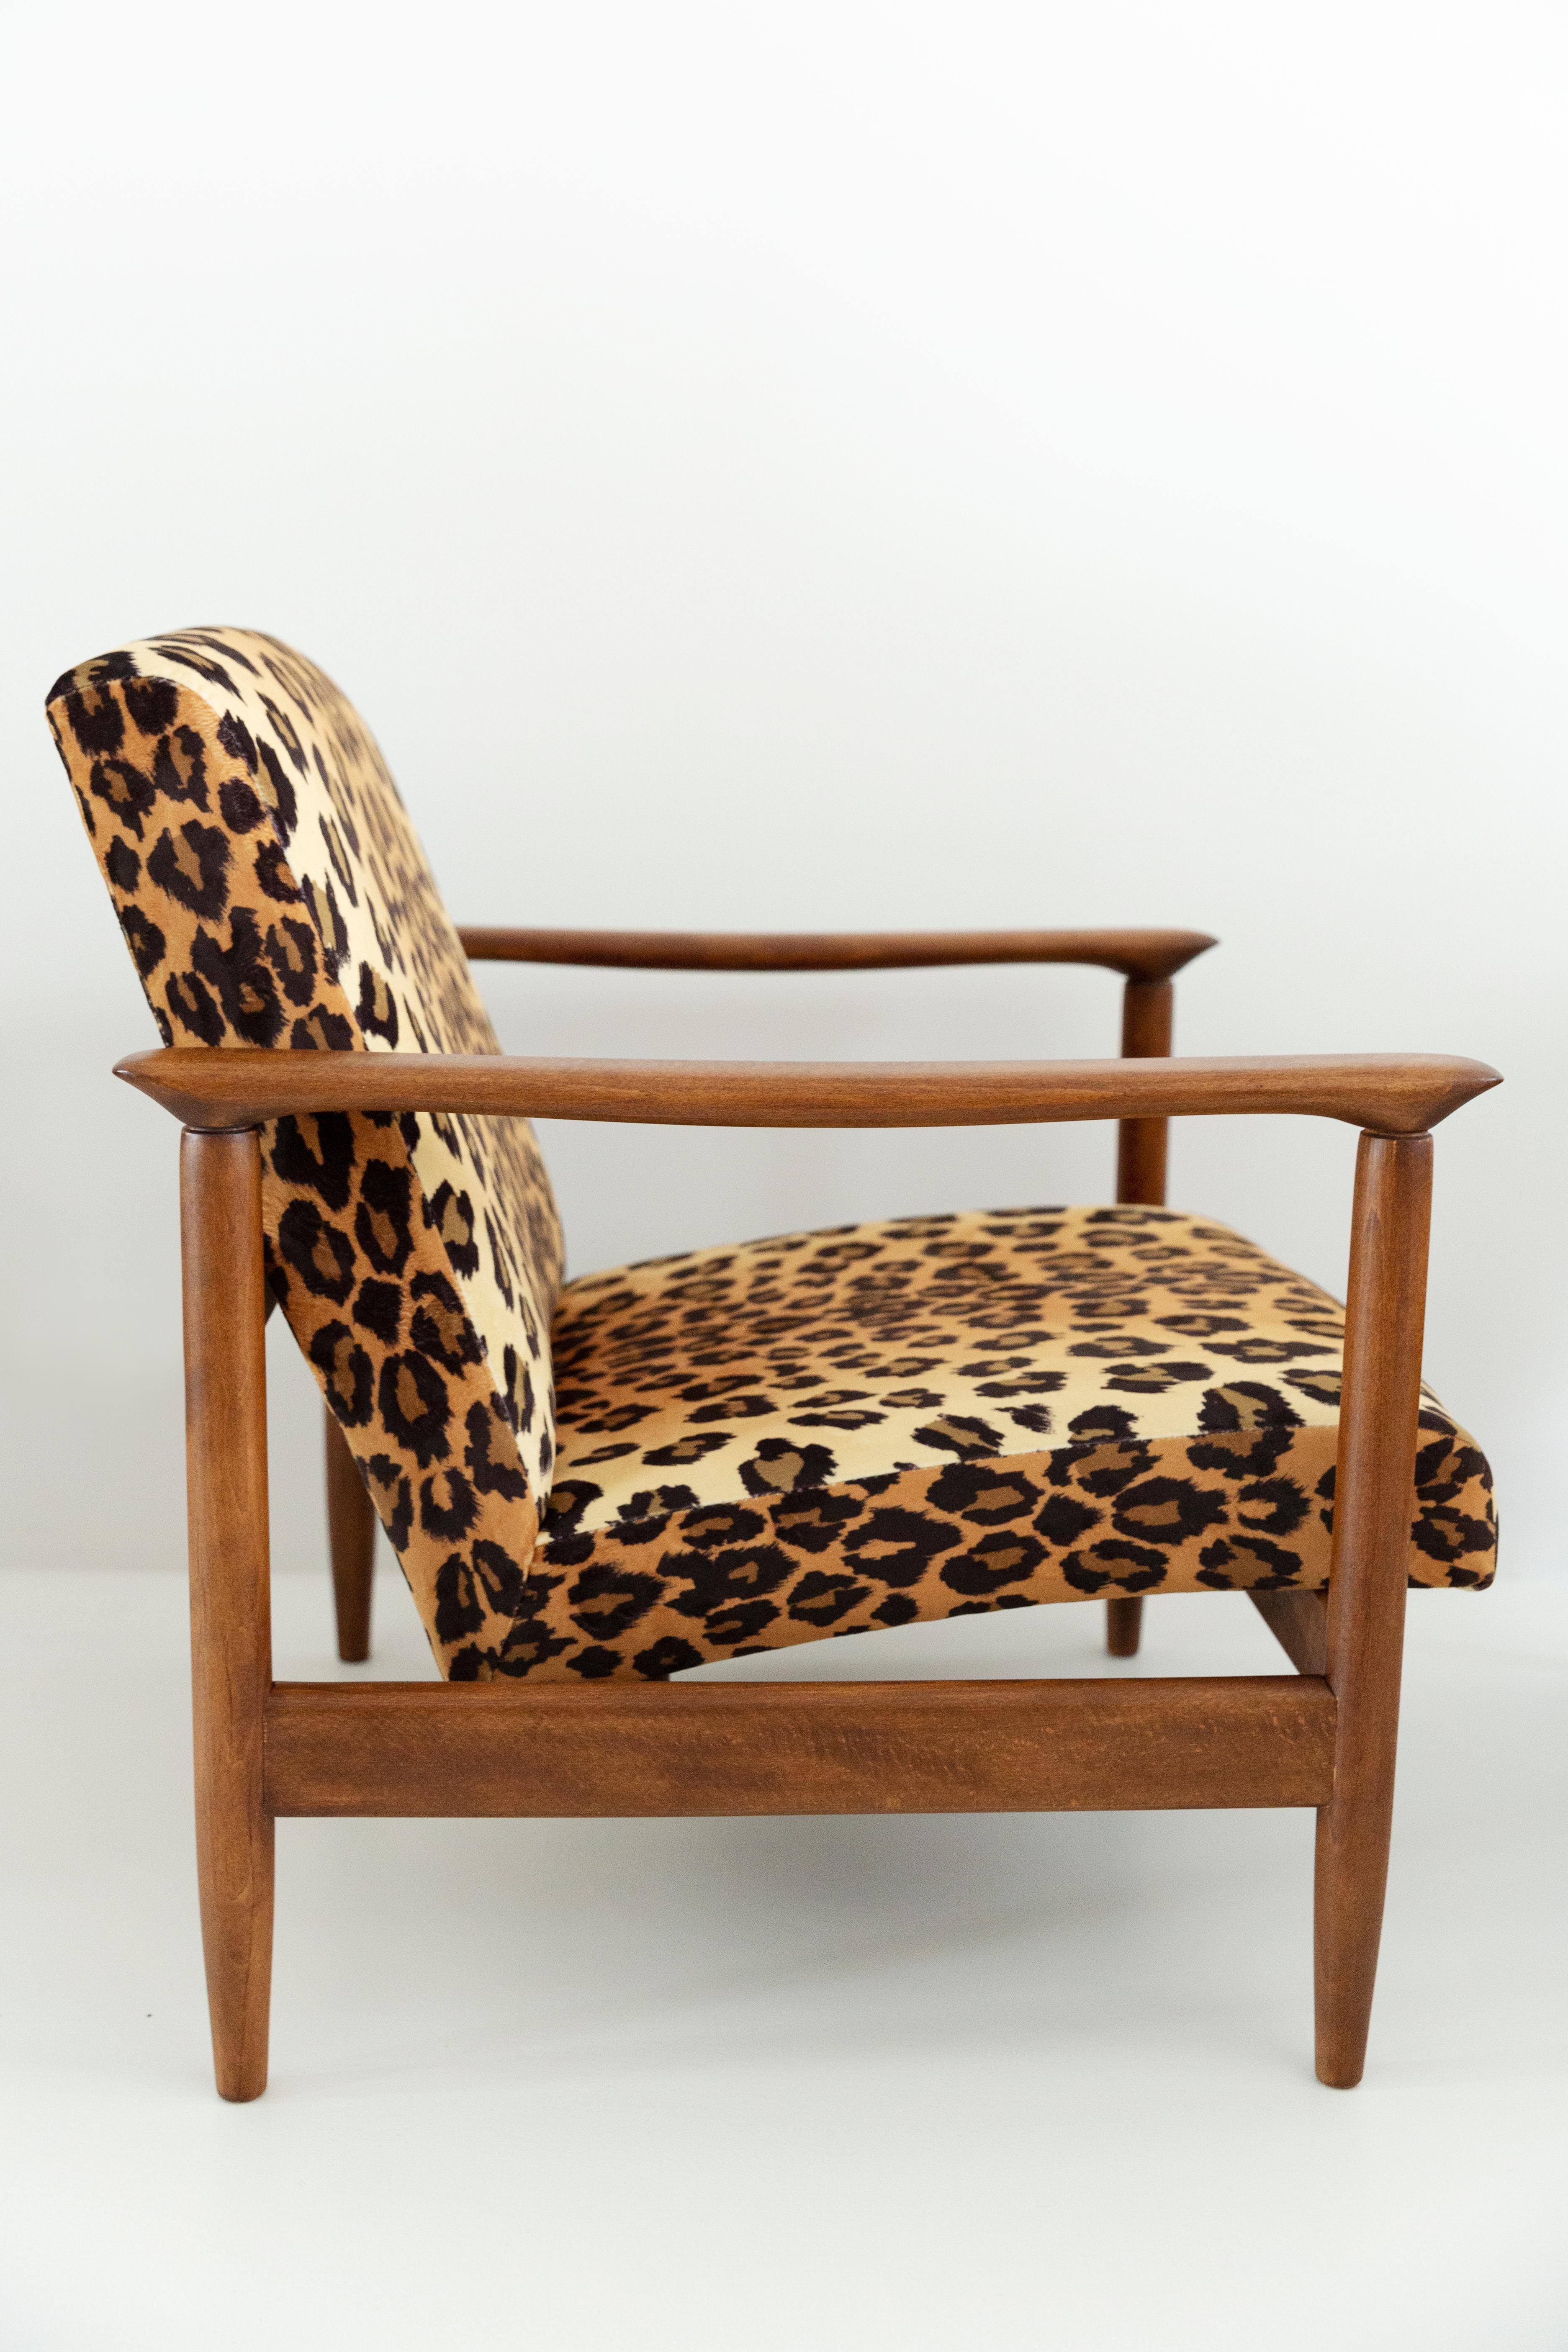 Hand-Crafted Set of Two Leopard Print Velvet Armchairs, Edmund Homa, GFM-142, 1960s, Poland For Sale